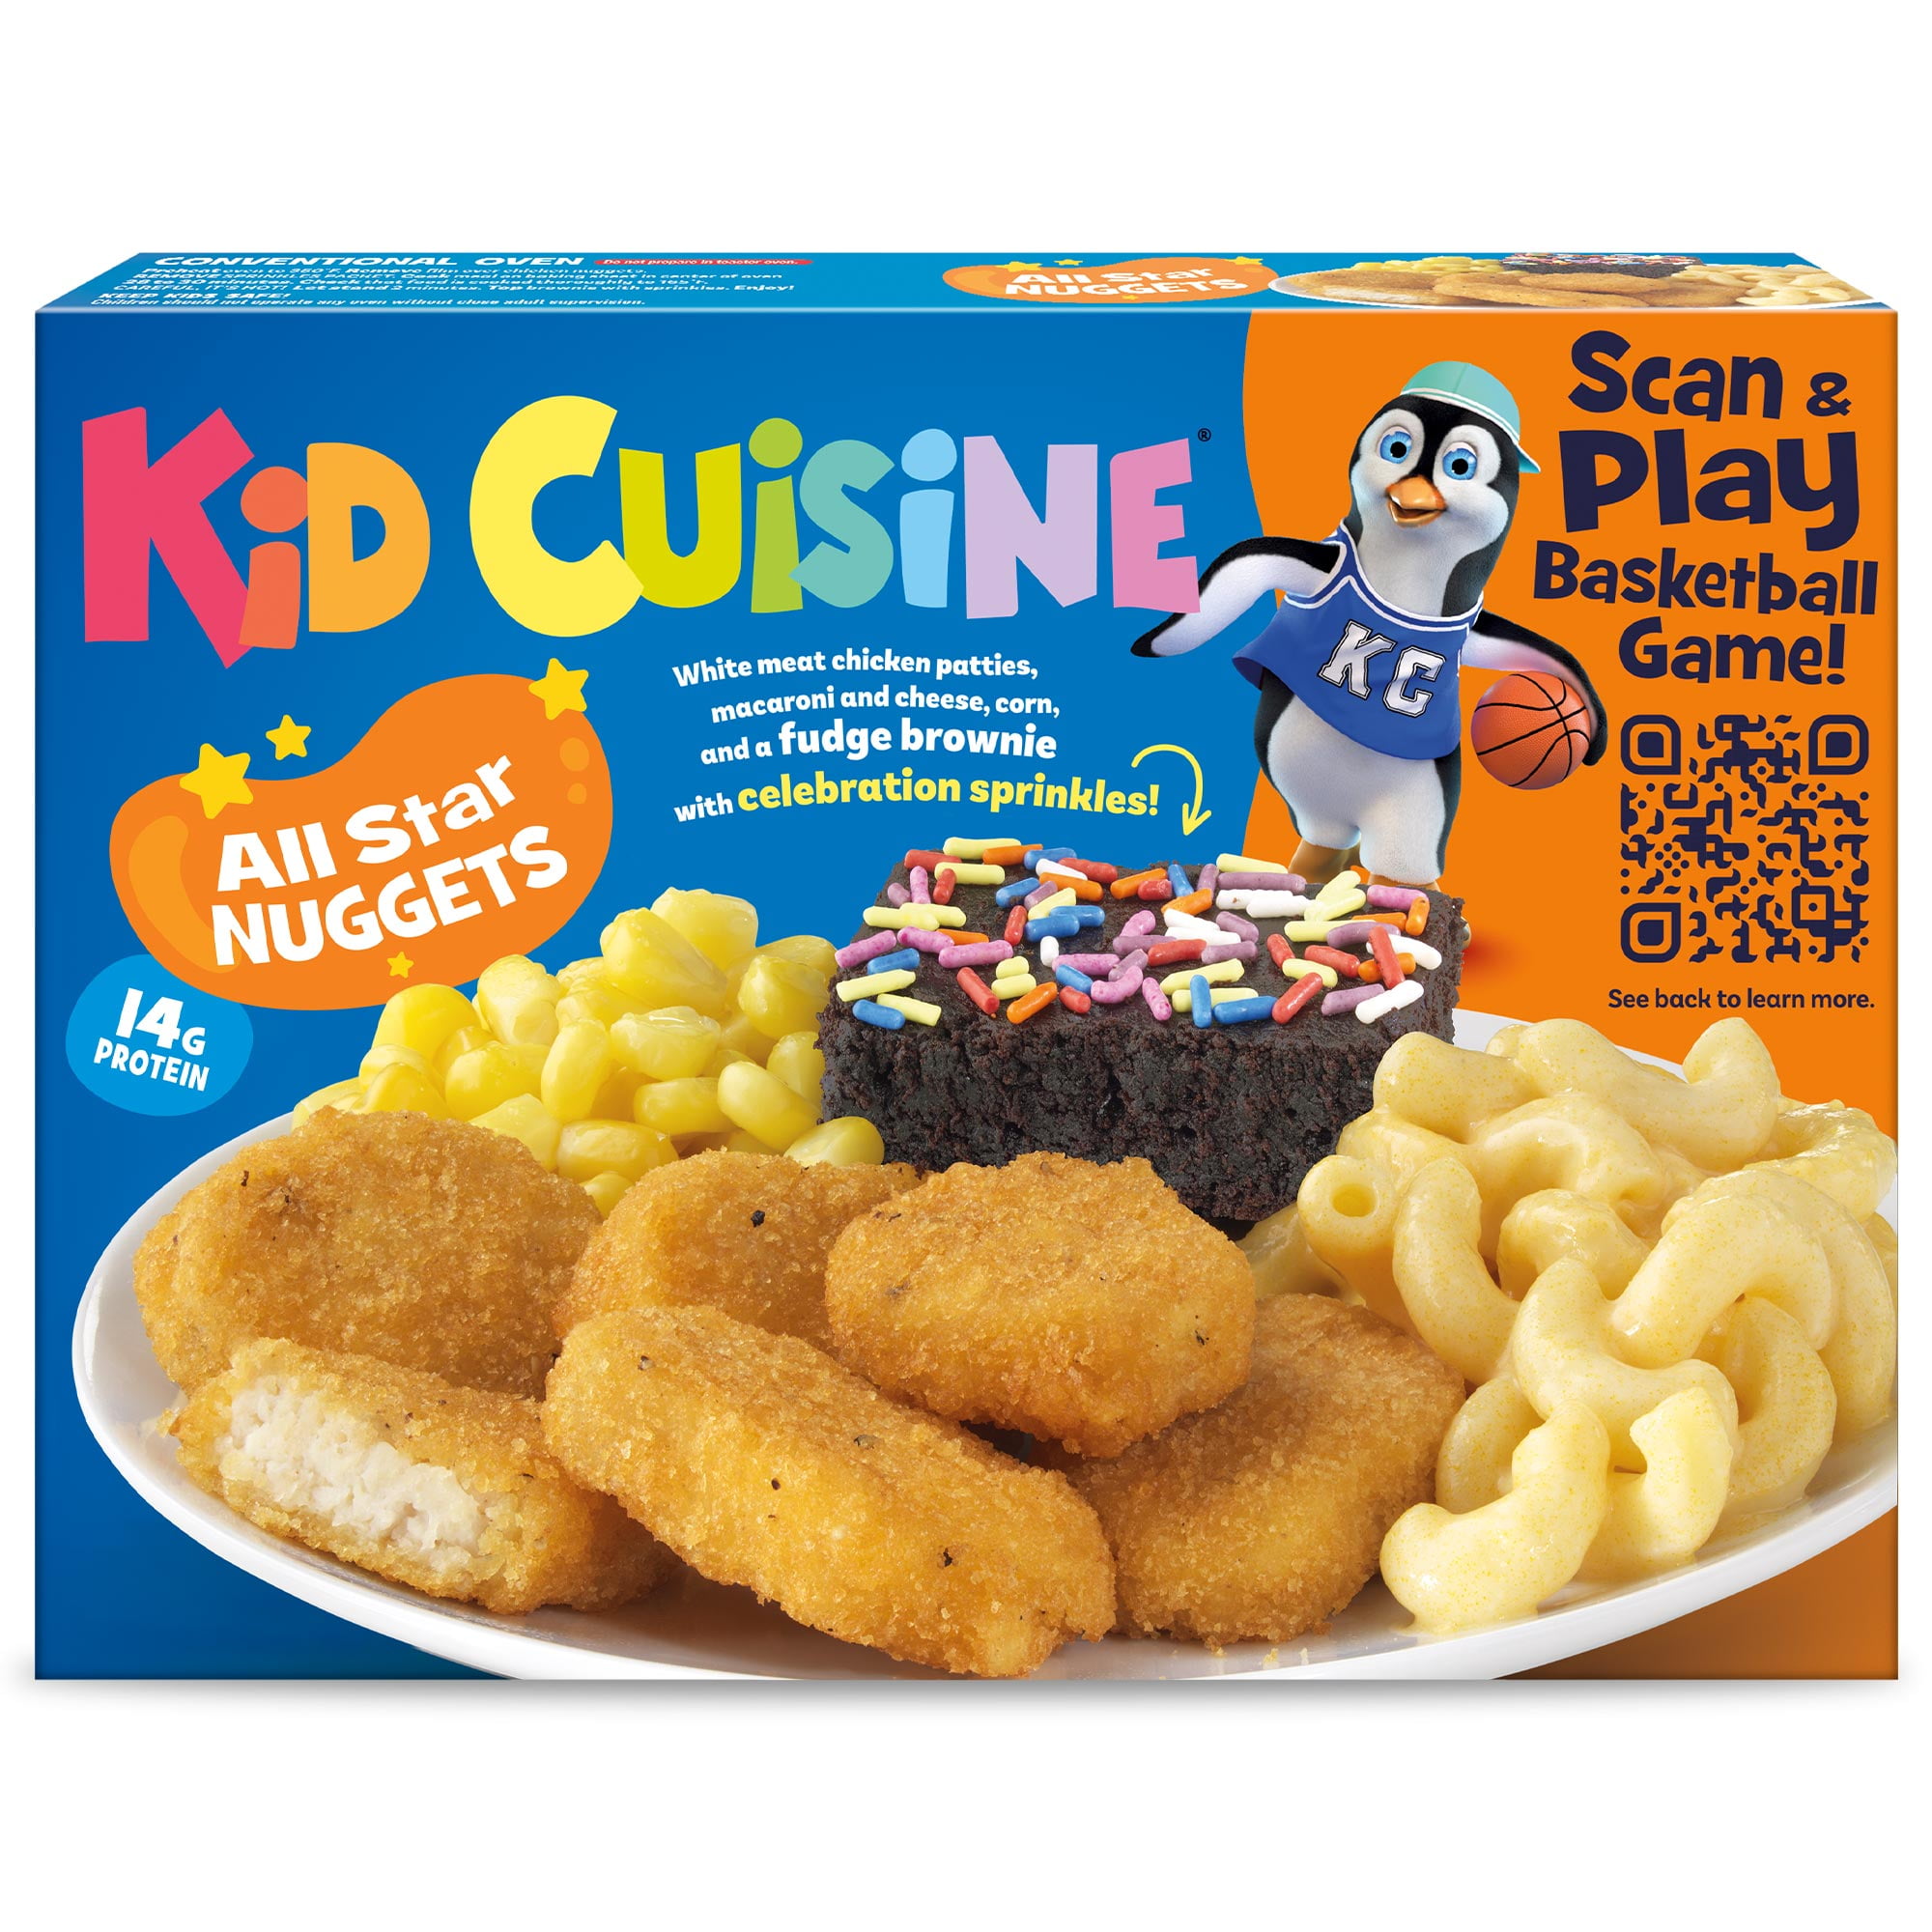 The Ultimate Review of the Nugget Kid's Couch! - Celebrating with kids